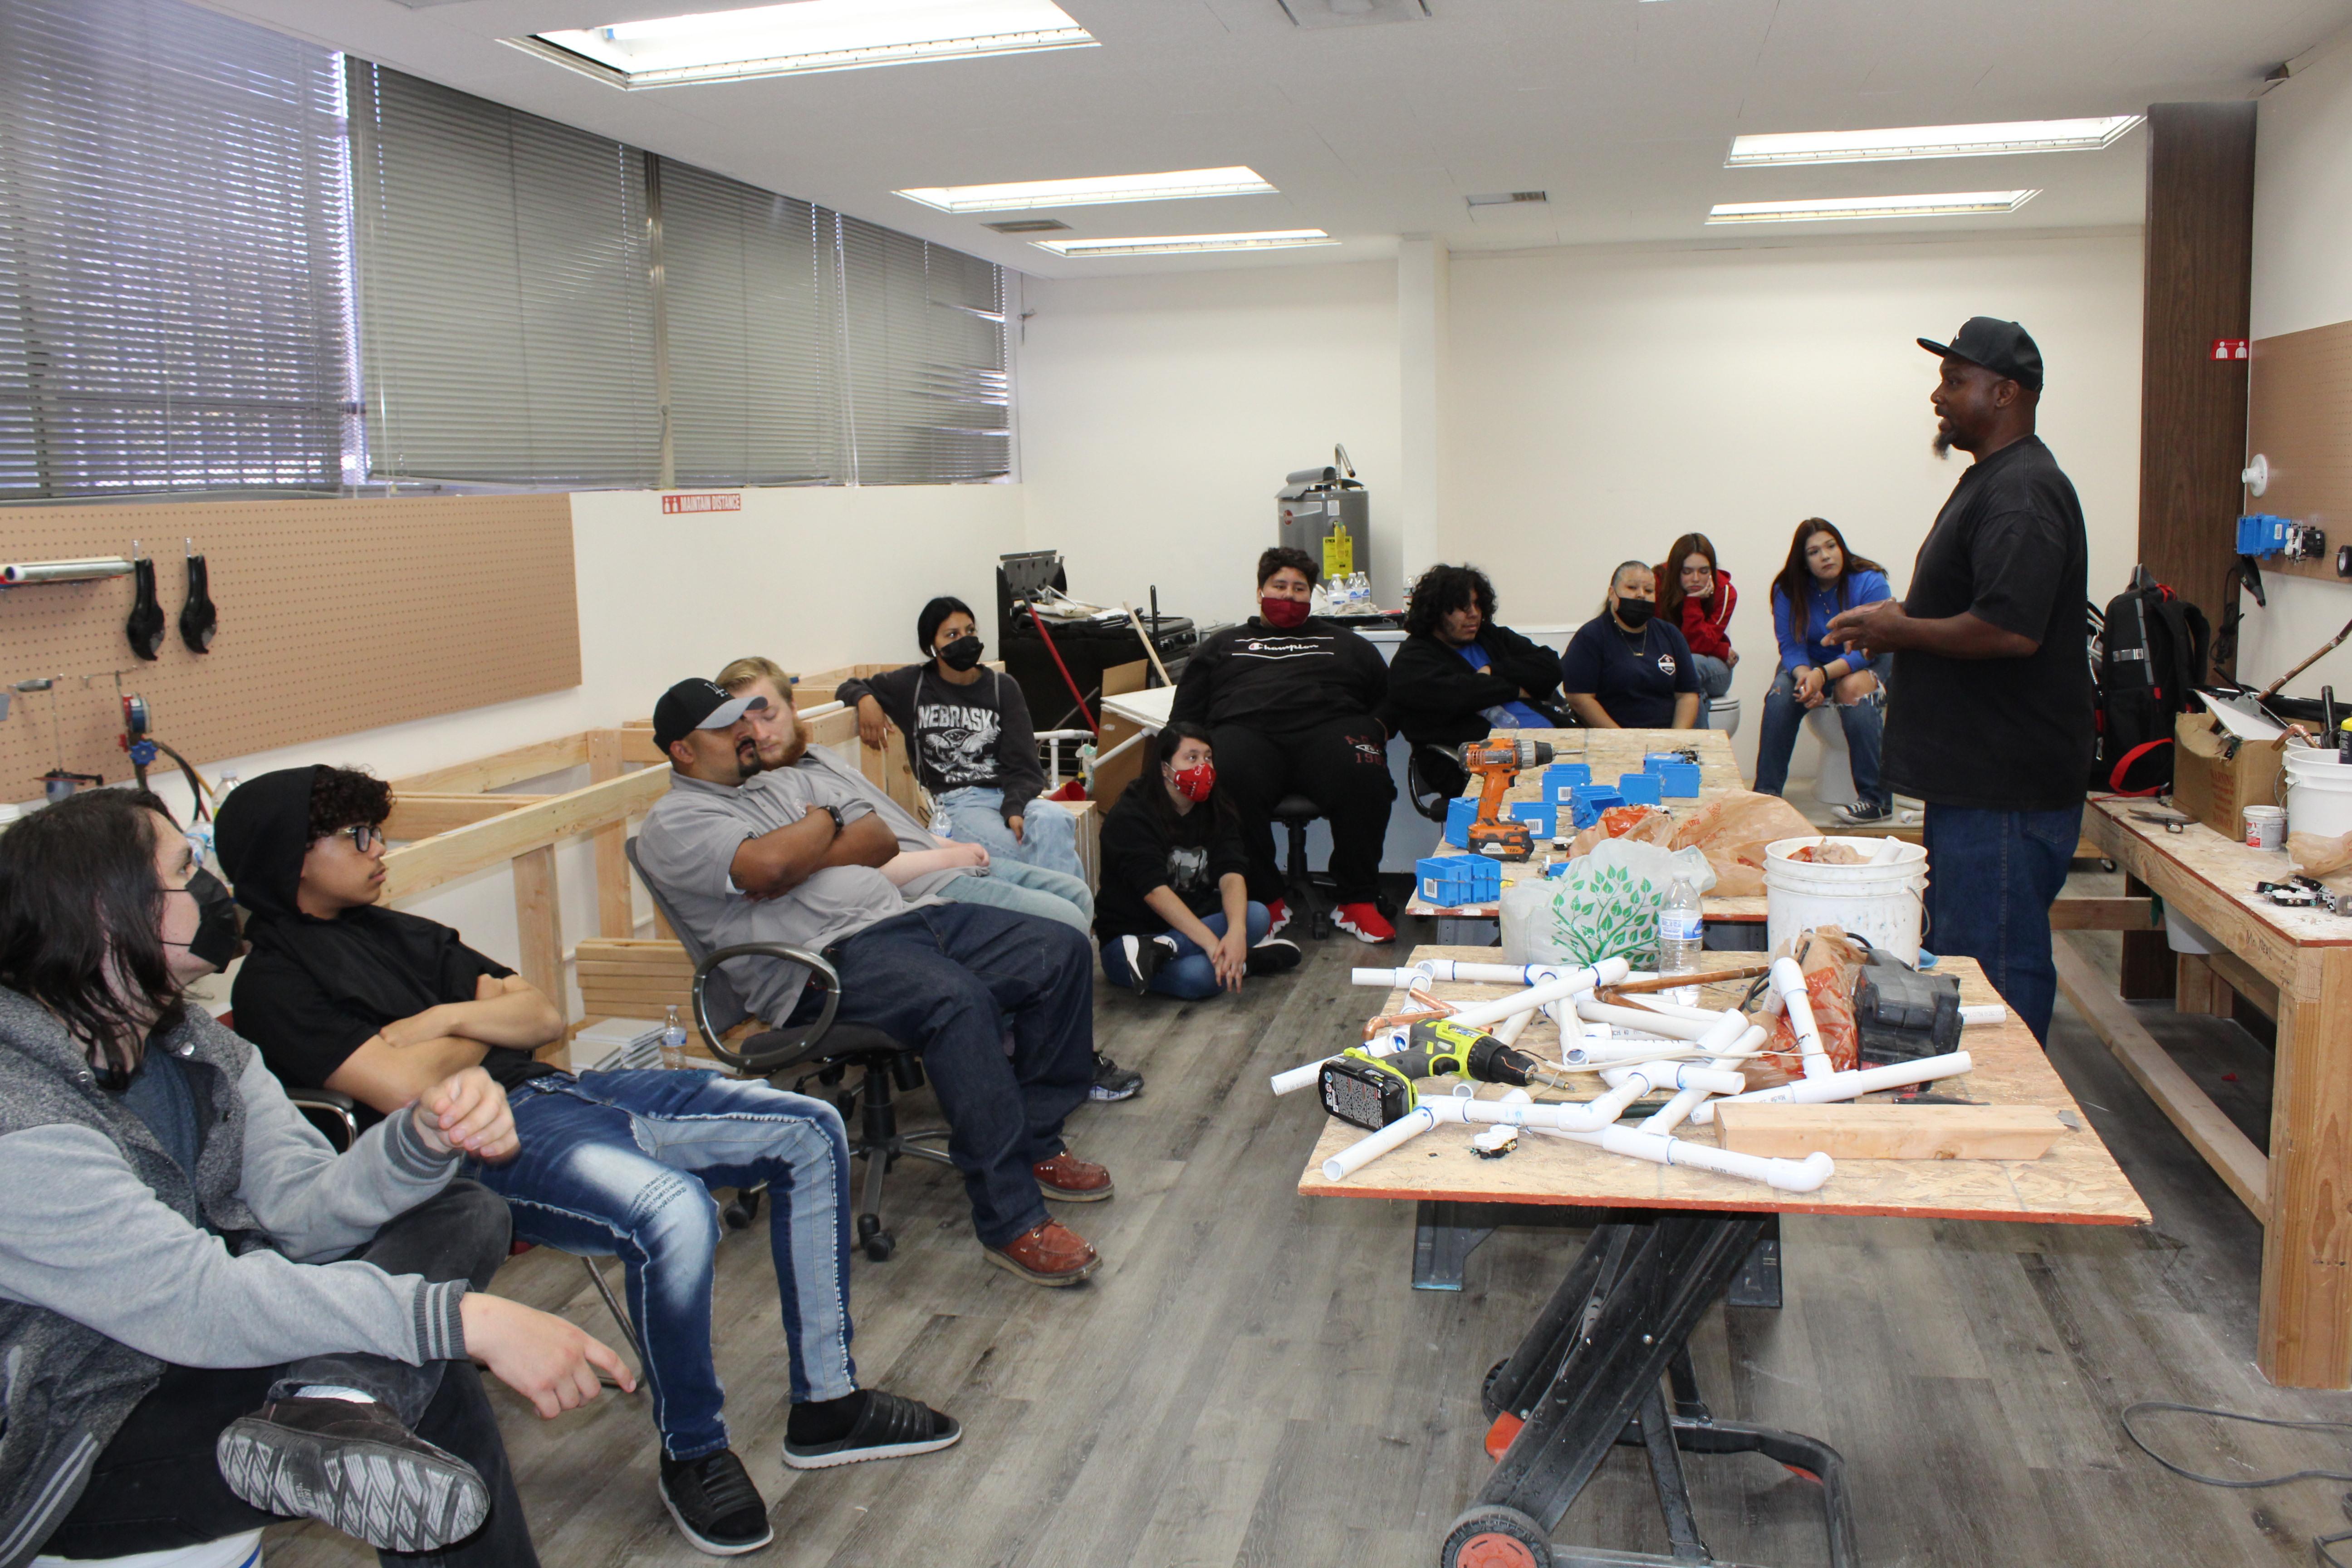 Maurice Neal teaching the CAMT students about wiring